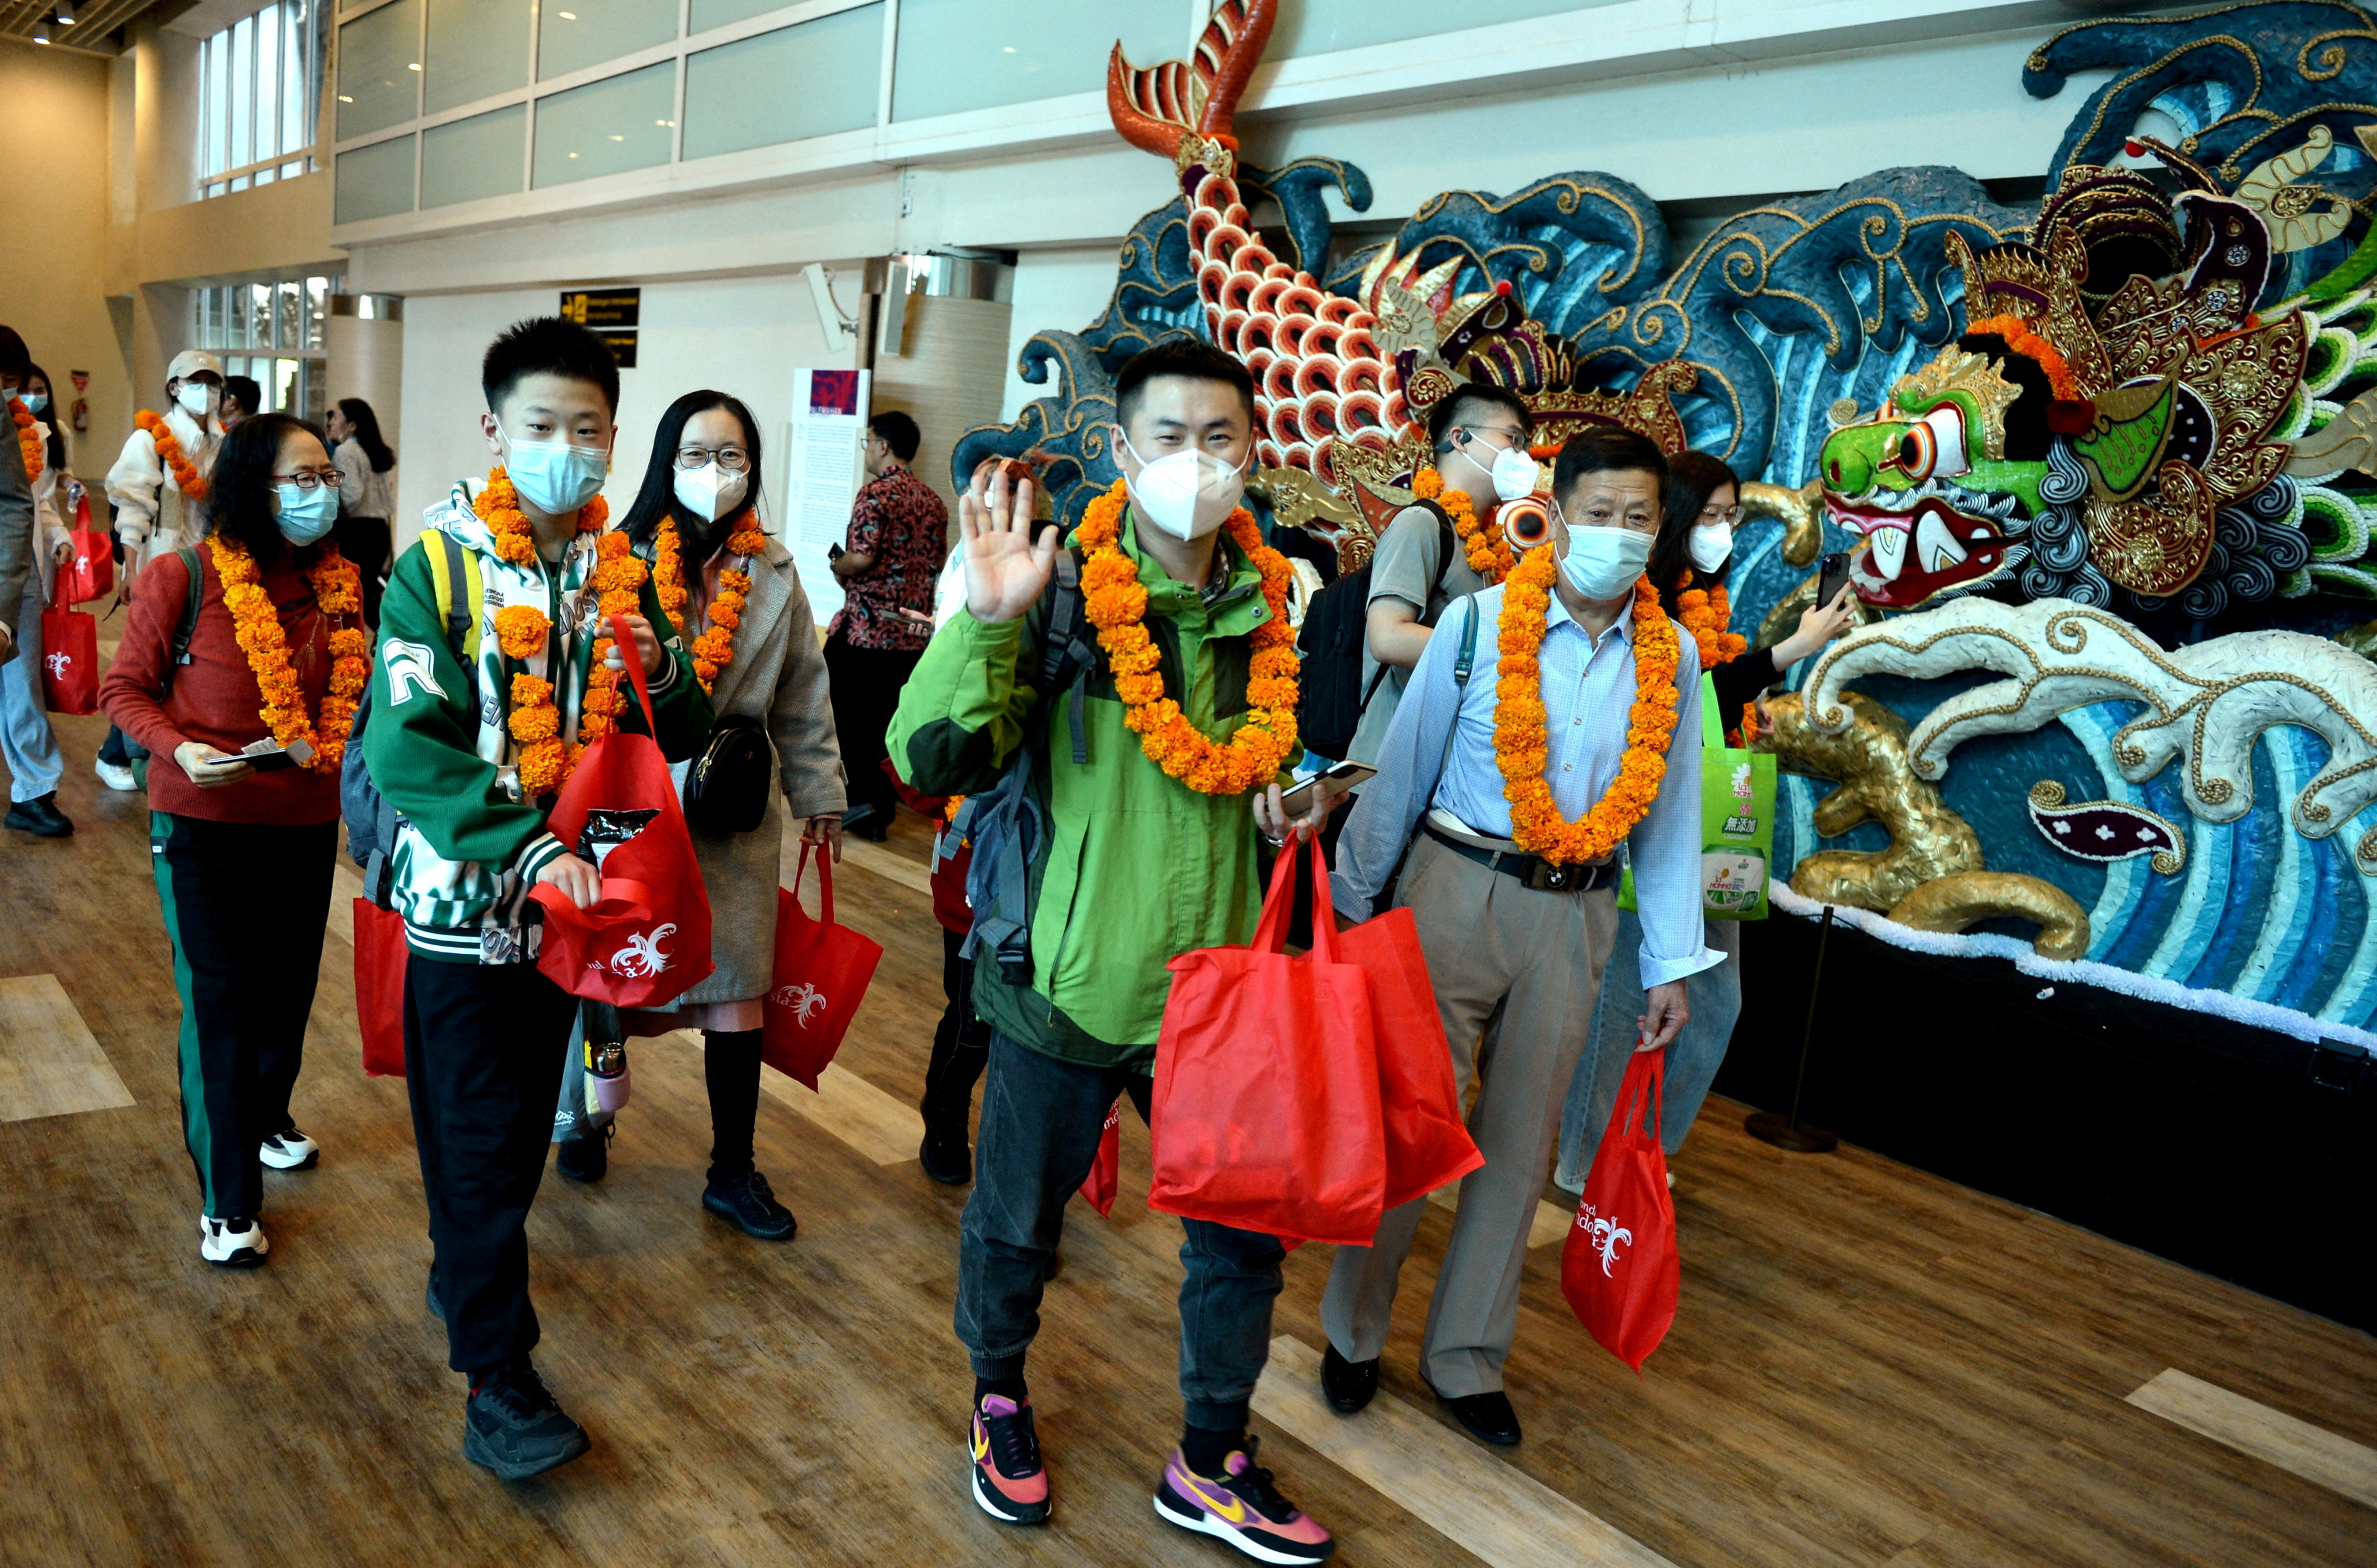 Chinese trips more than double in first 6 days of Lunar New Year from last year